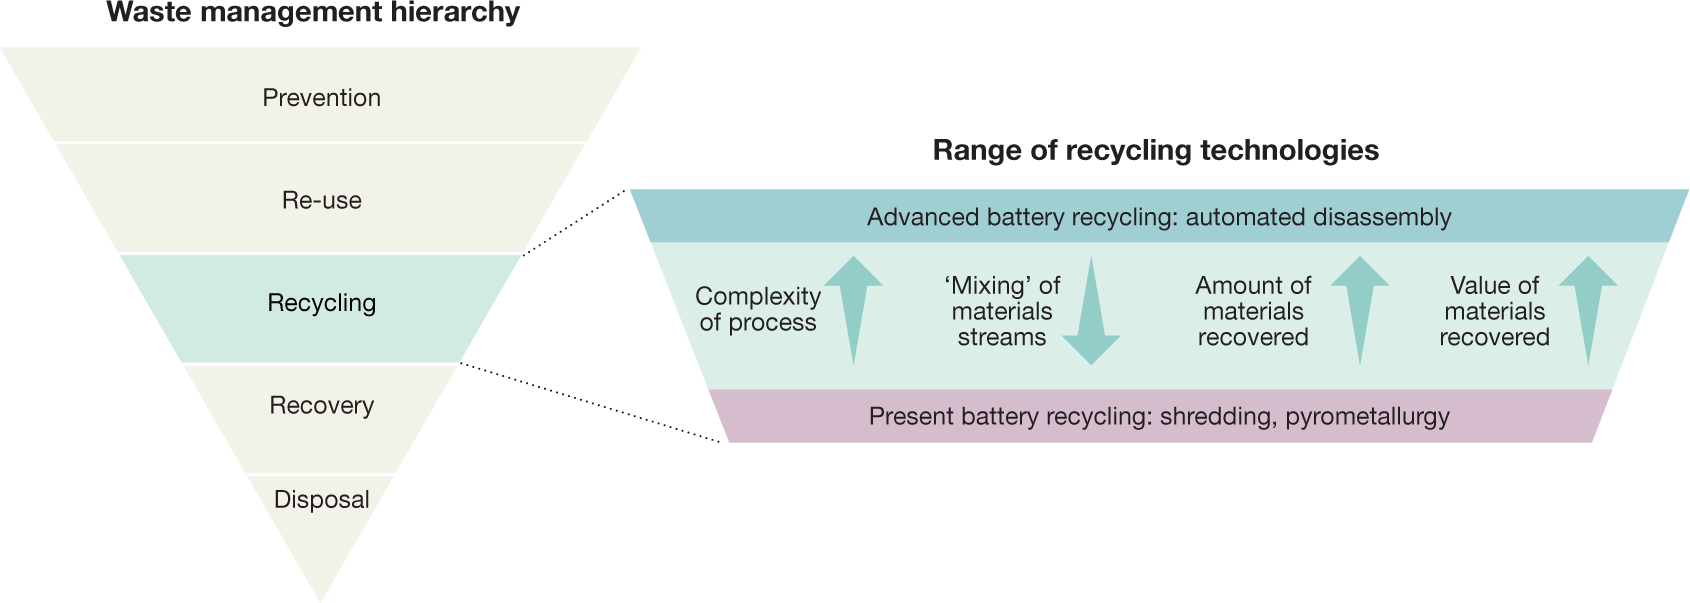 Recycling lithium-ion batteries from electric vehicles | Nature